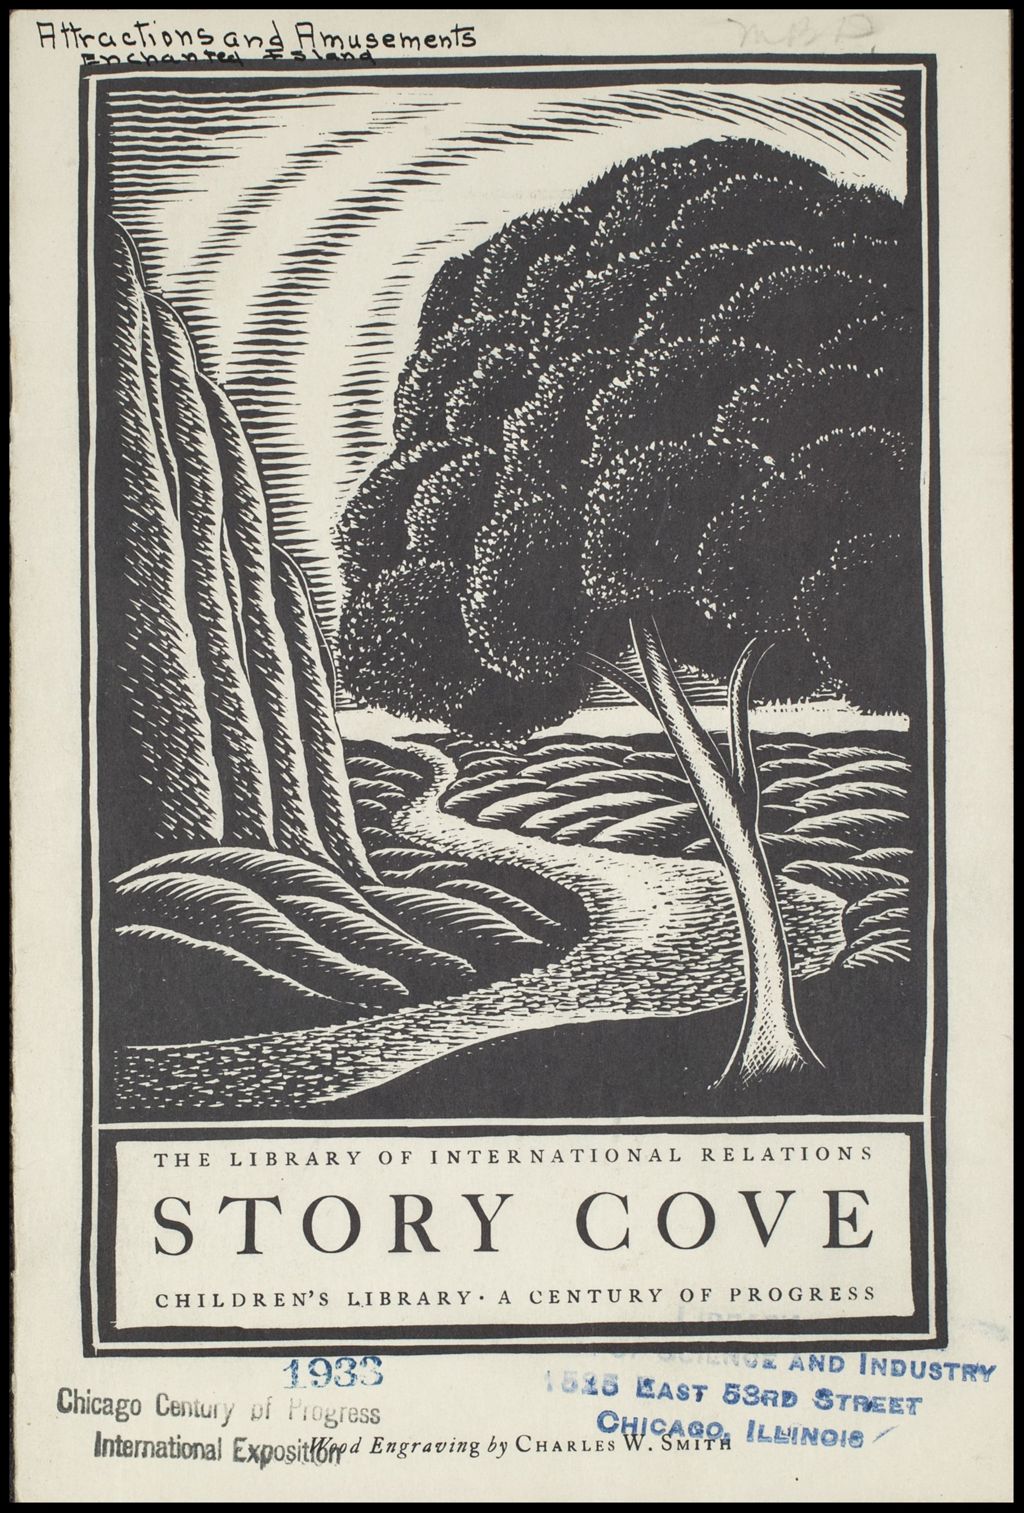 Miniature of Story Cove - children's library (Folder 16-240)